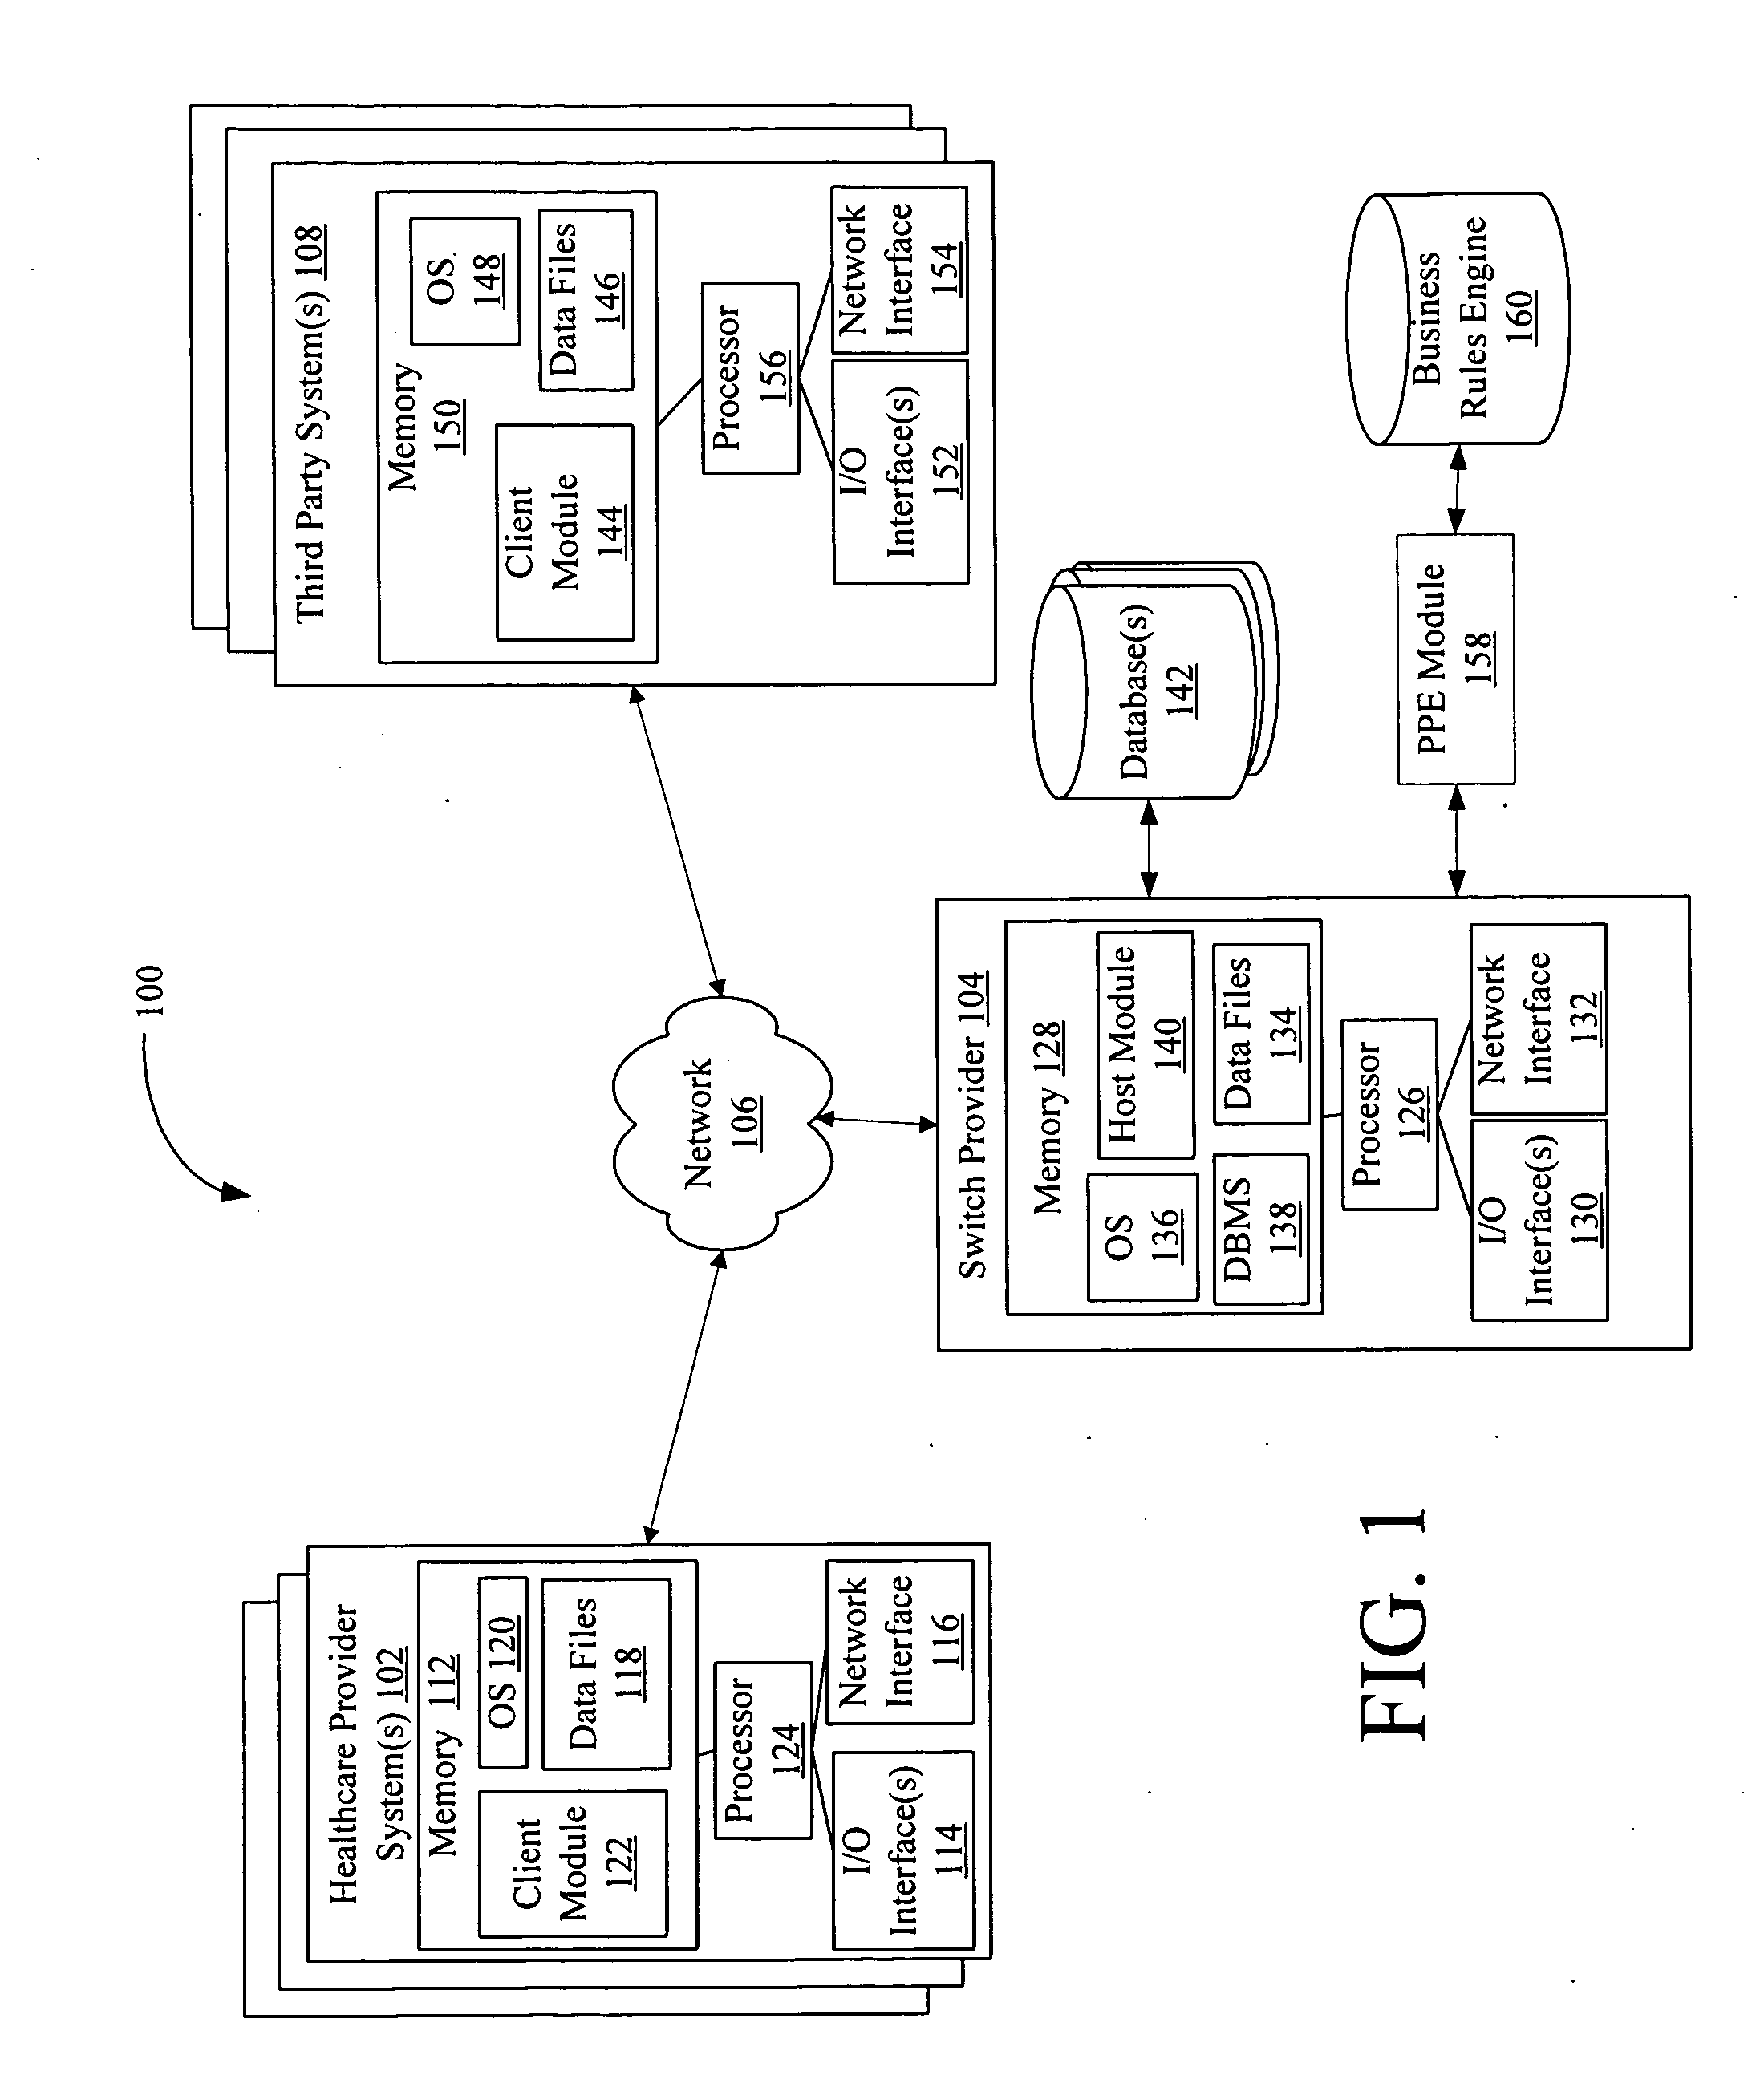 Systems and methods for processing electronically transmitted healthcare related transactions